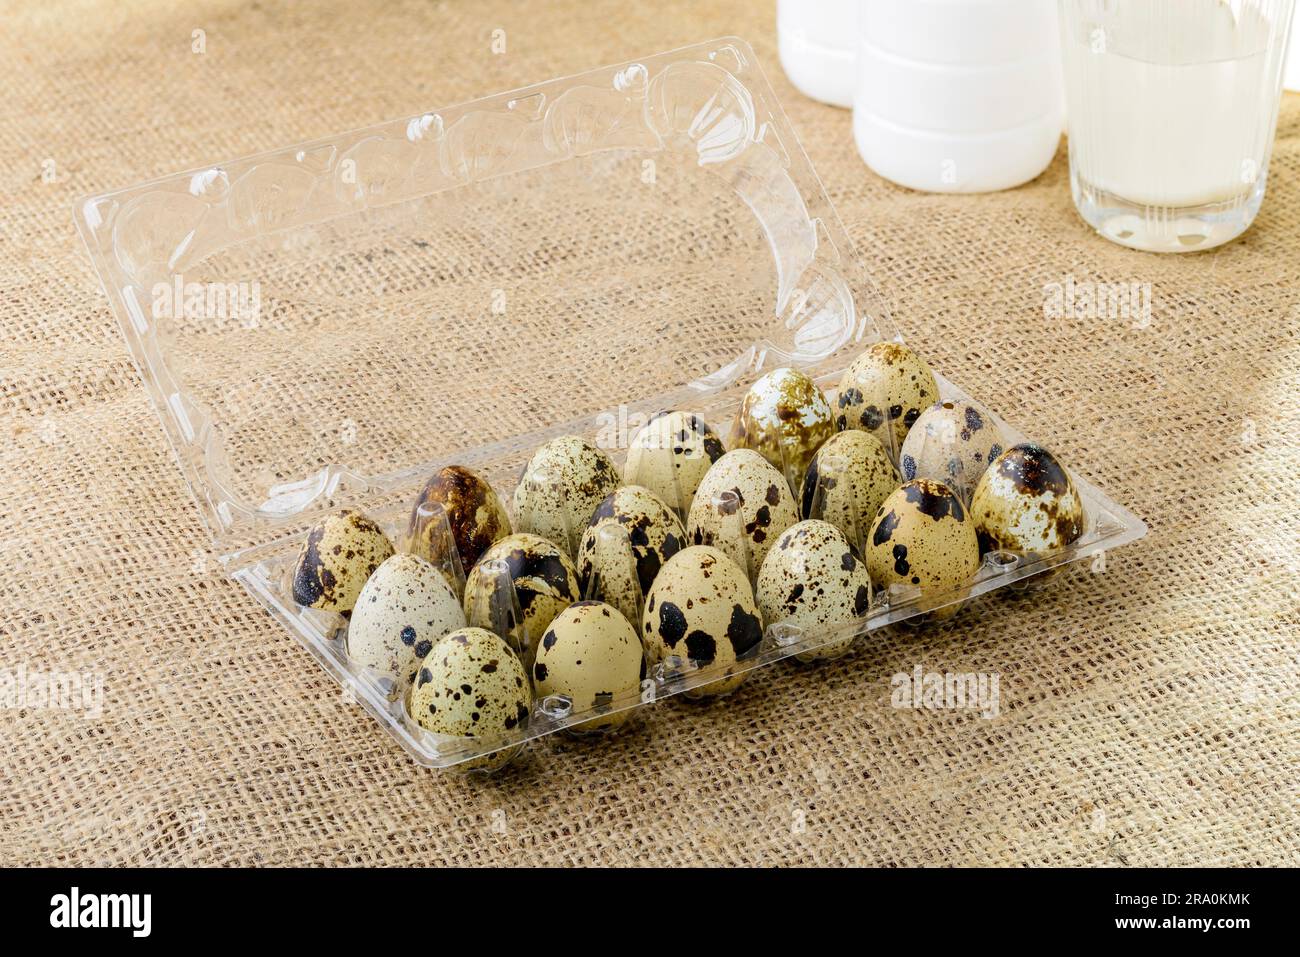 Quail eggs in a transparent plastic container, on a burlap tablecloth Stock Photo